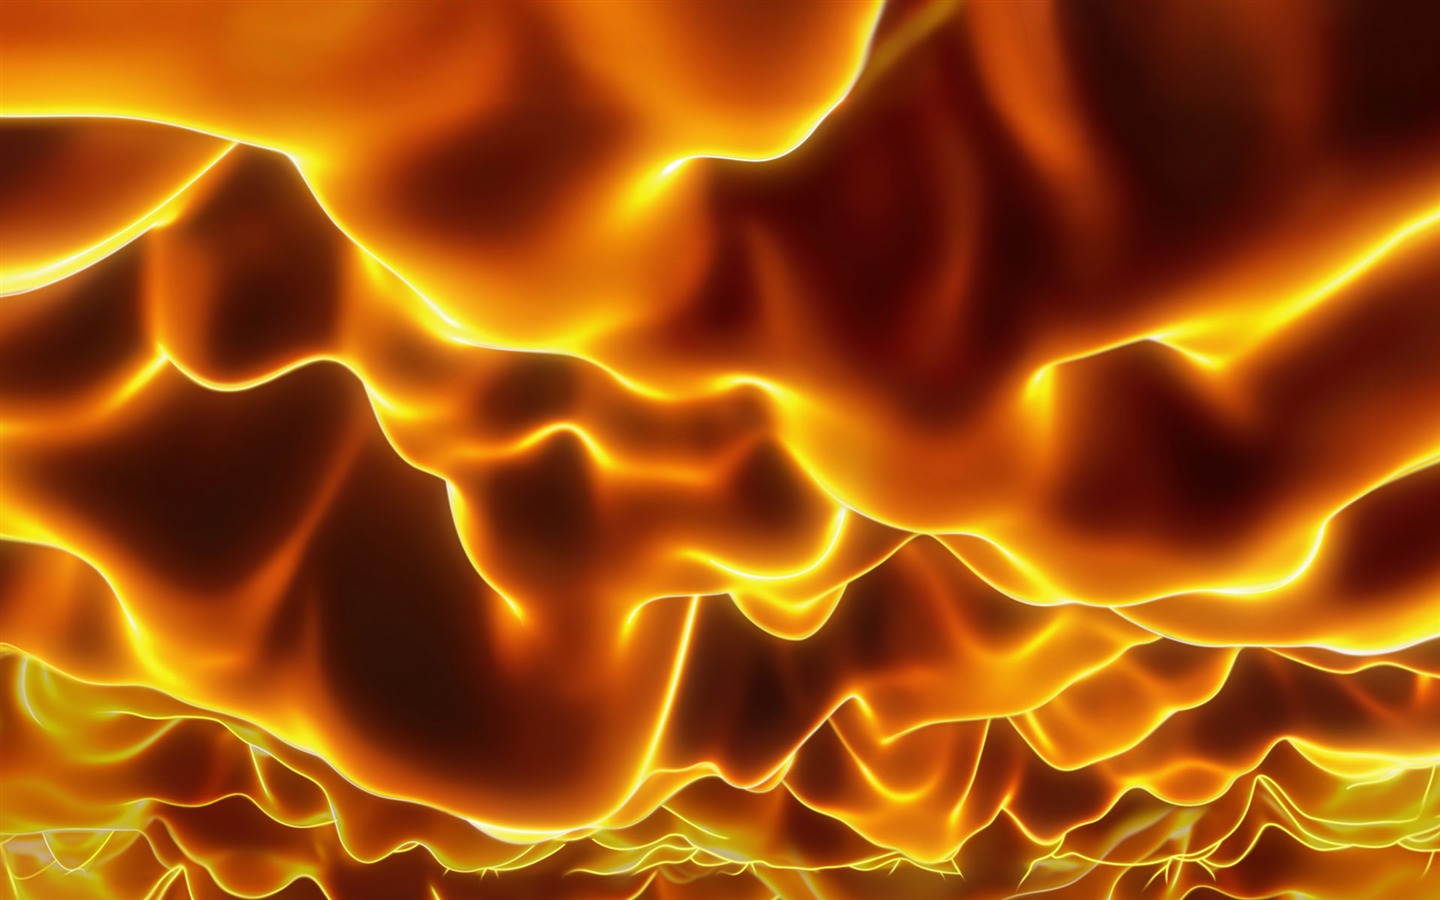 Flame Feature HD Wallpaper #4 - 1440x900